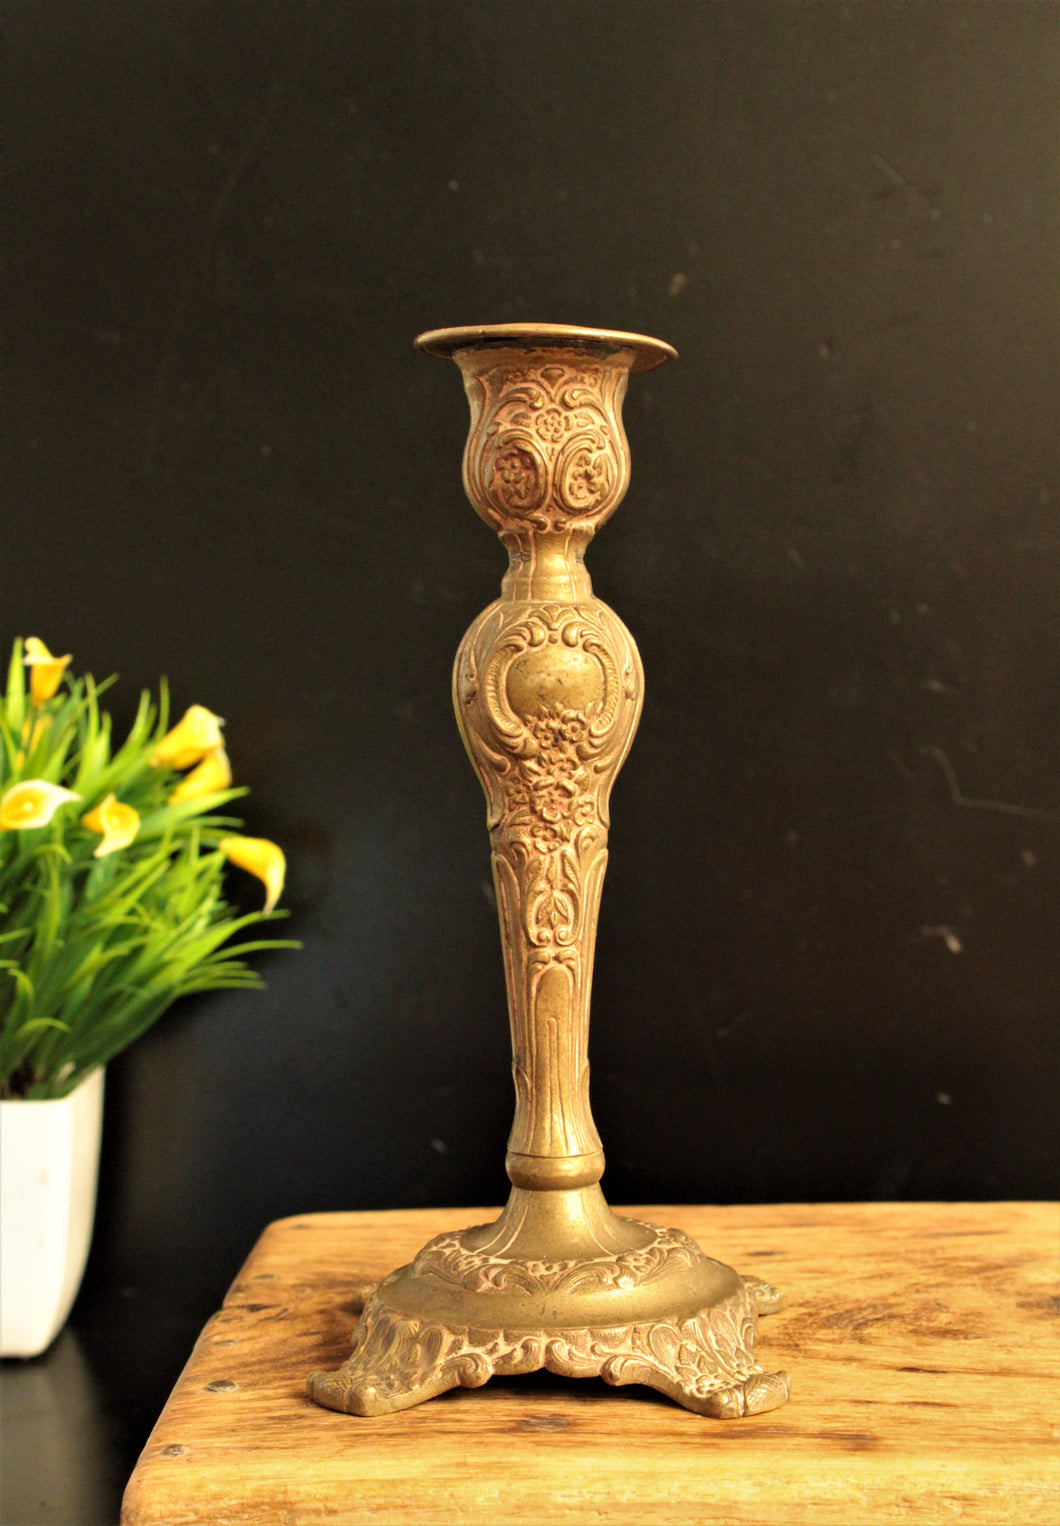 Vintage Classy Taper Candle Stand - made of Brass